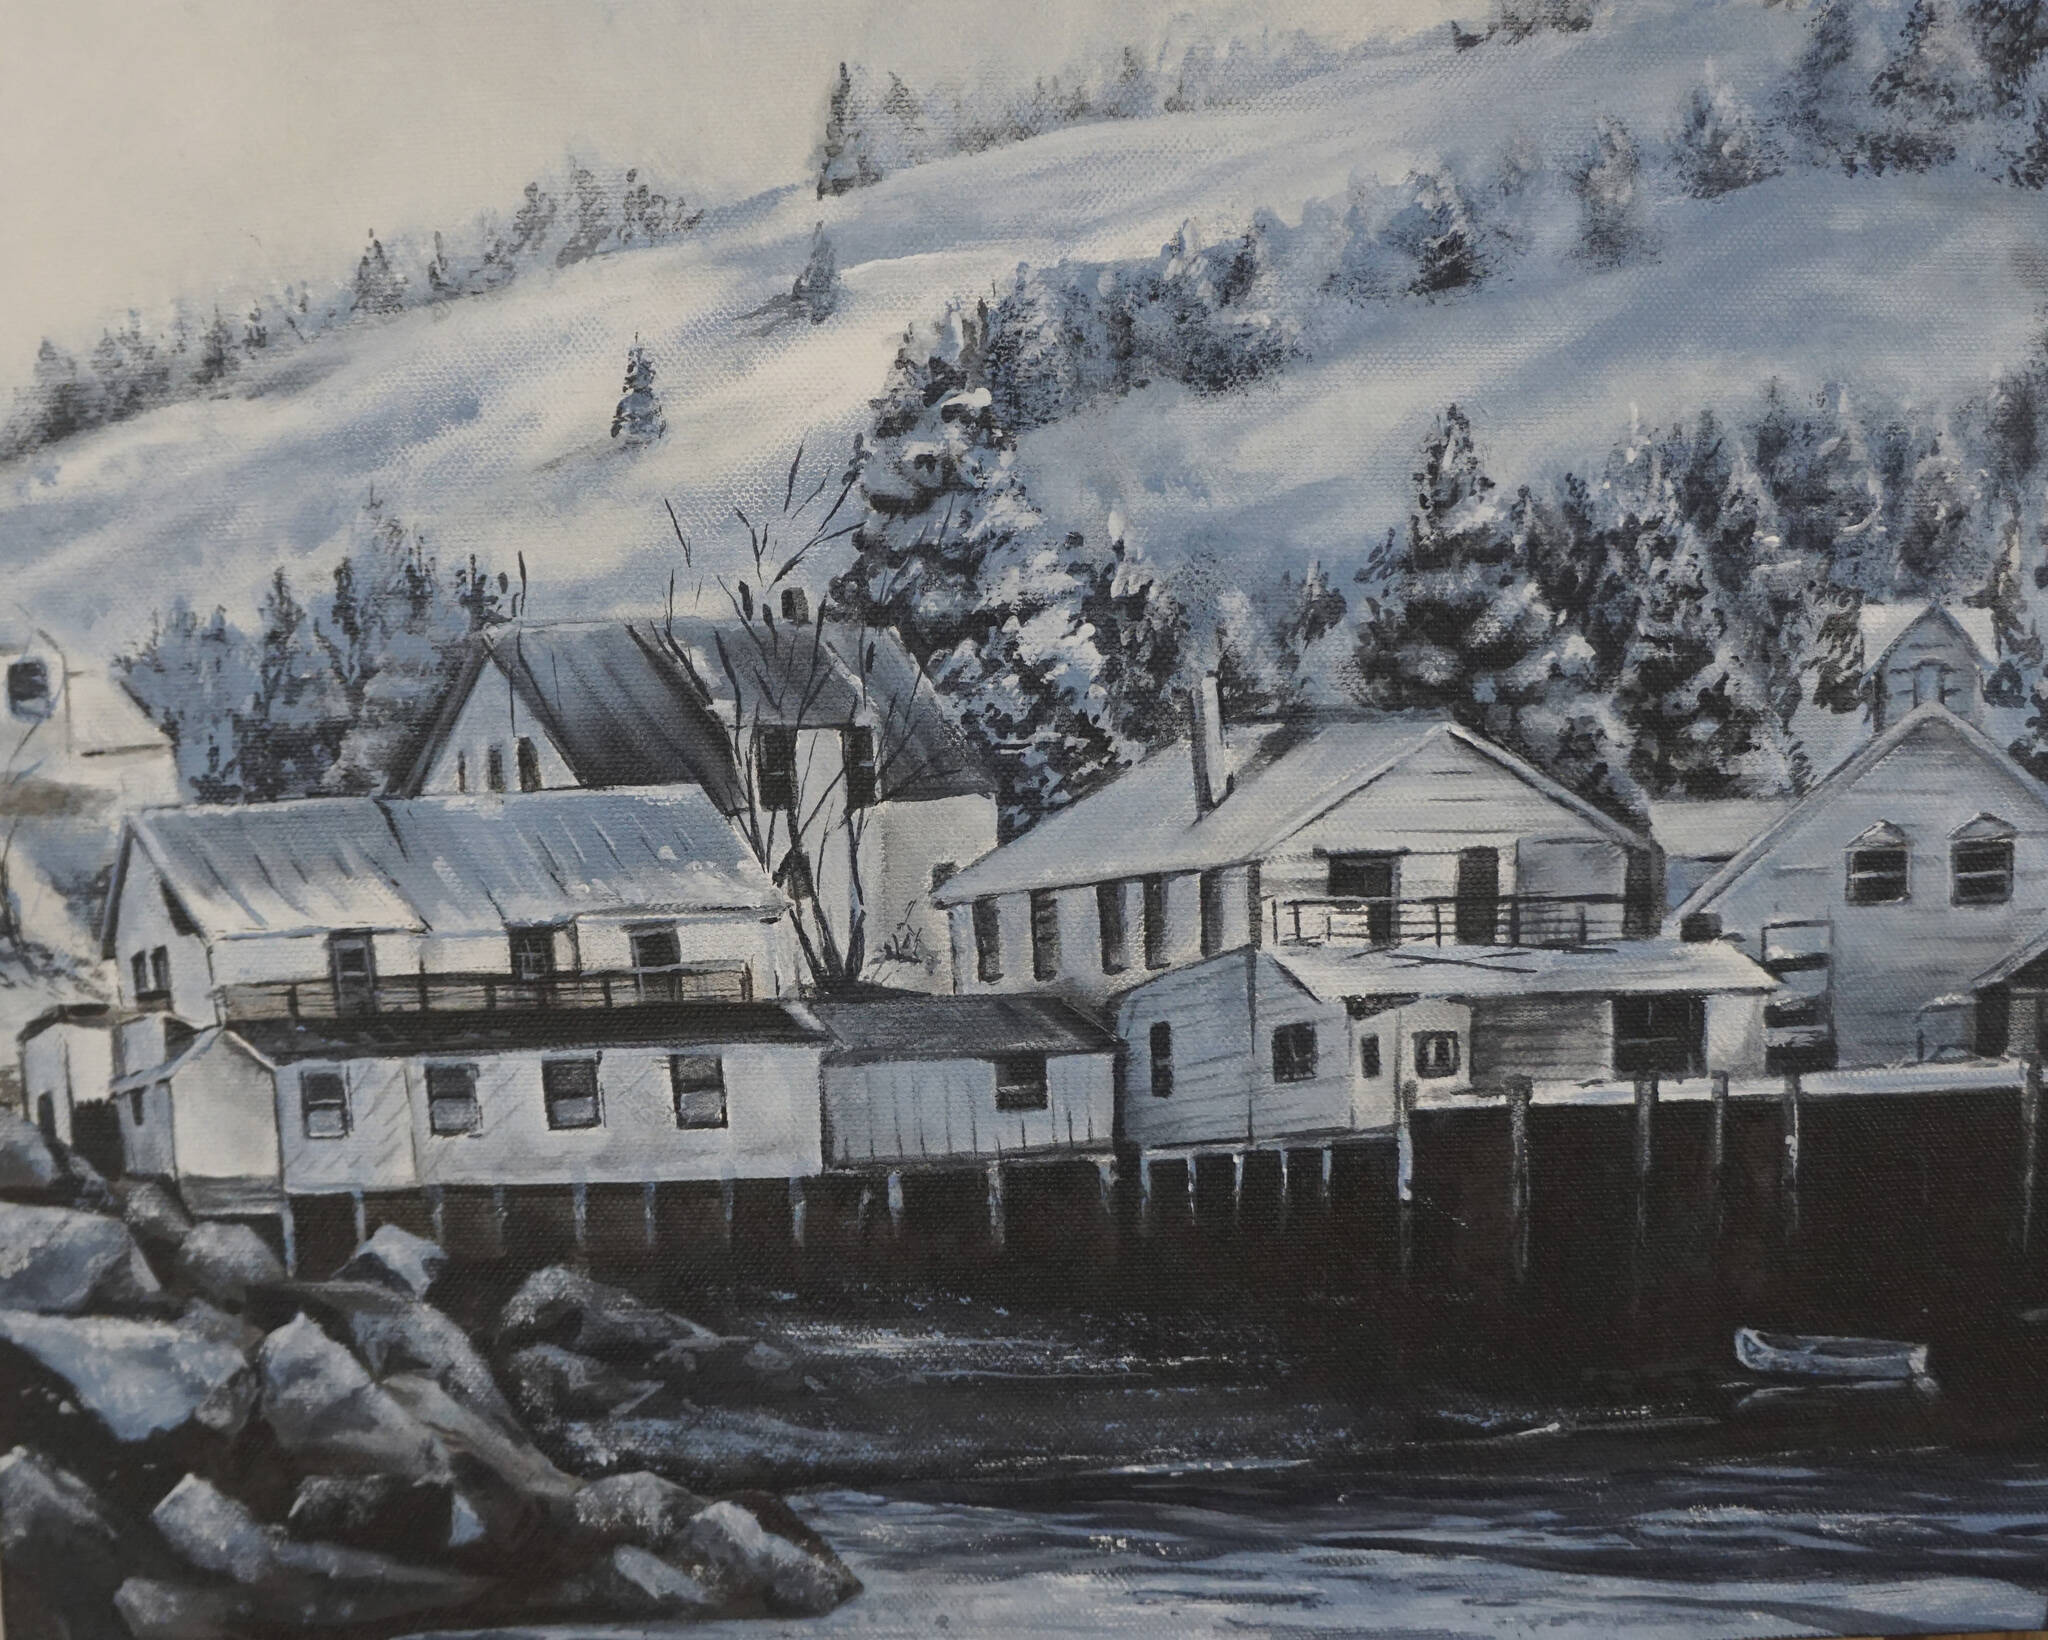 Kate Lochridge’s historical painting of Seldovia, Alaska, shows the old boardwalk before it got flooded by high tides after the 1964 Great Alaska Earthquake. Another painting shows the town after the high tide. (Photo by MIchael Armstrong/Homer News)